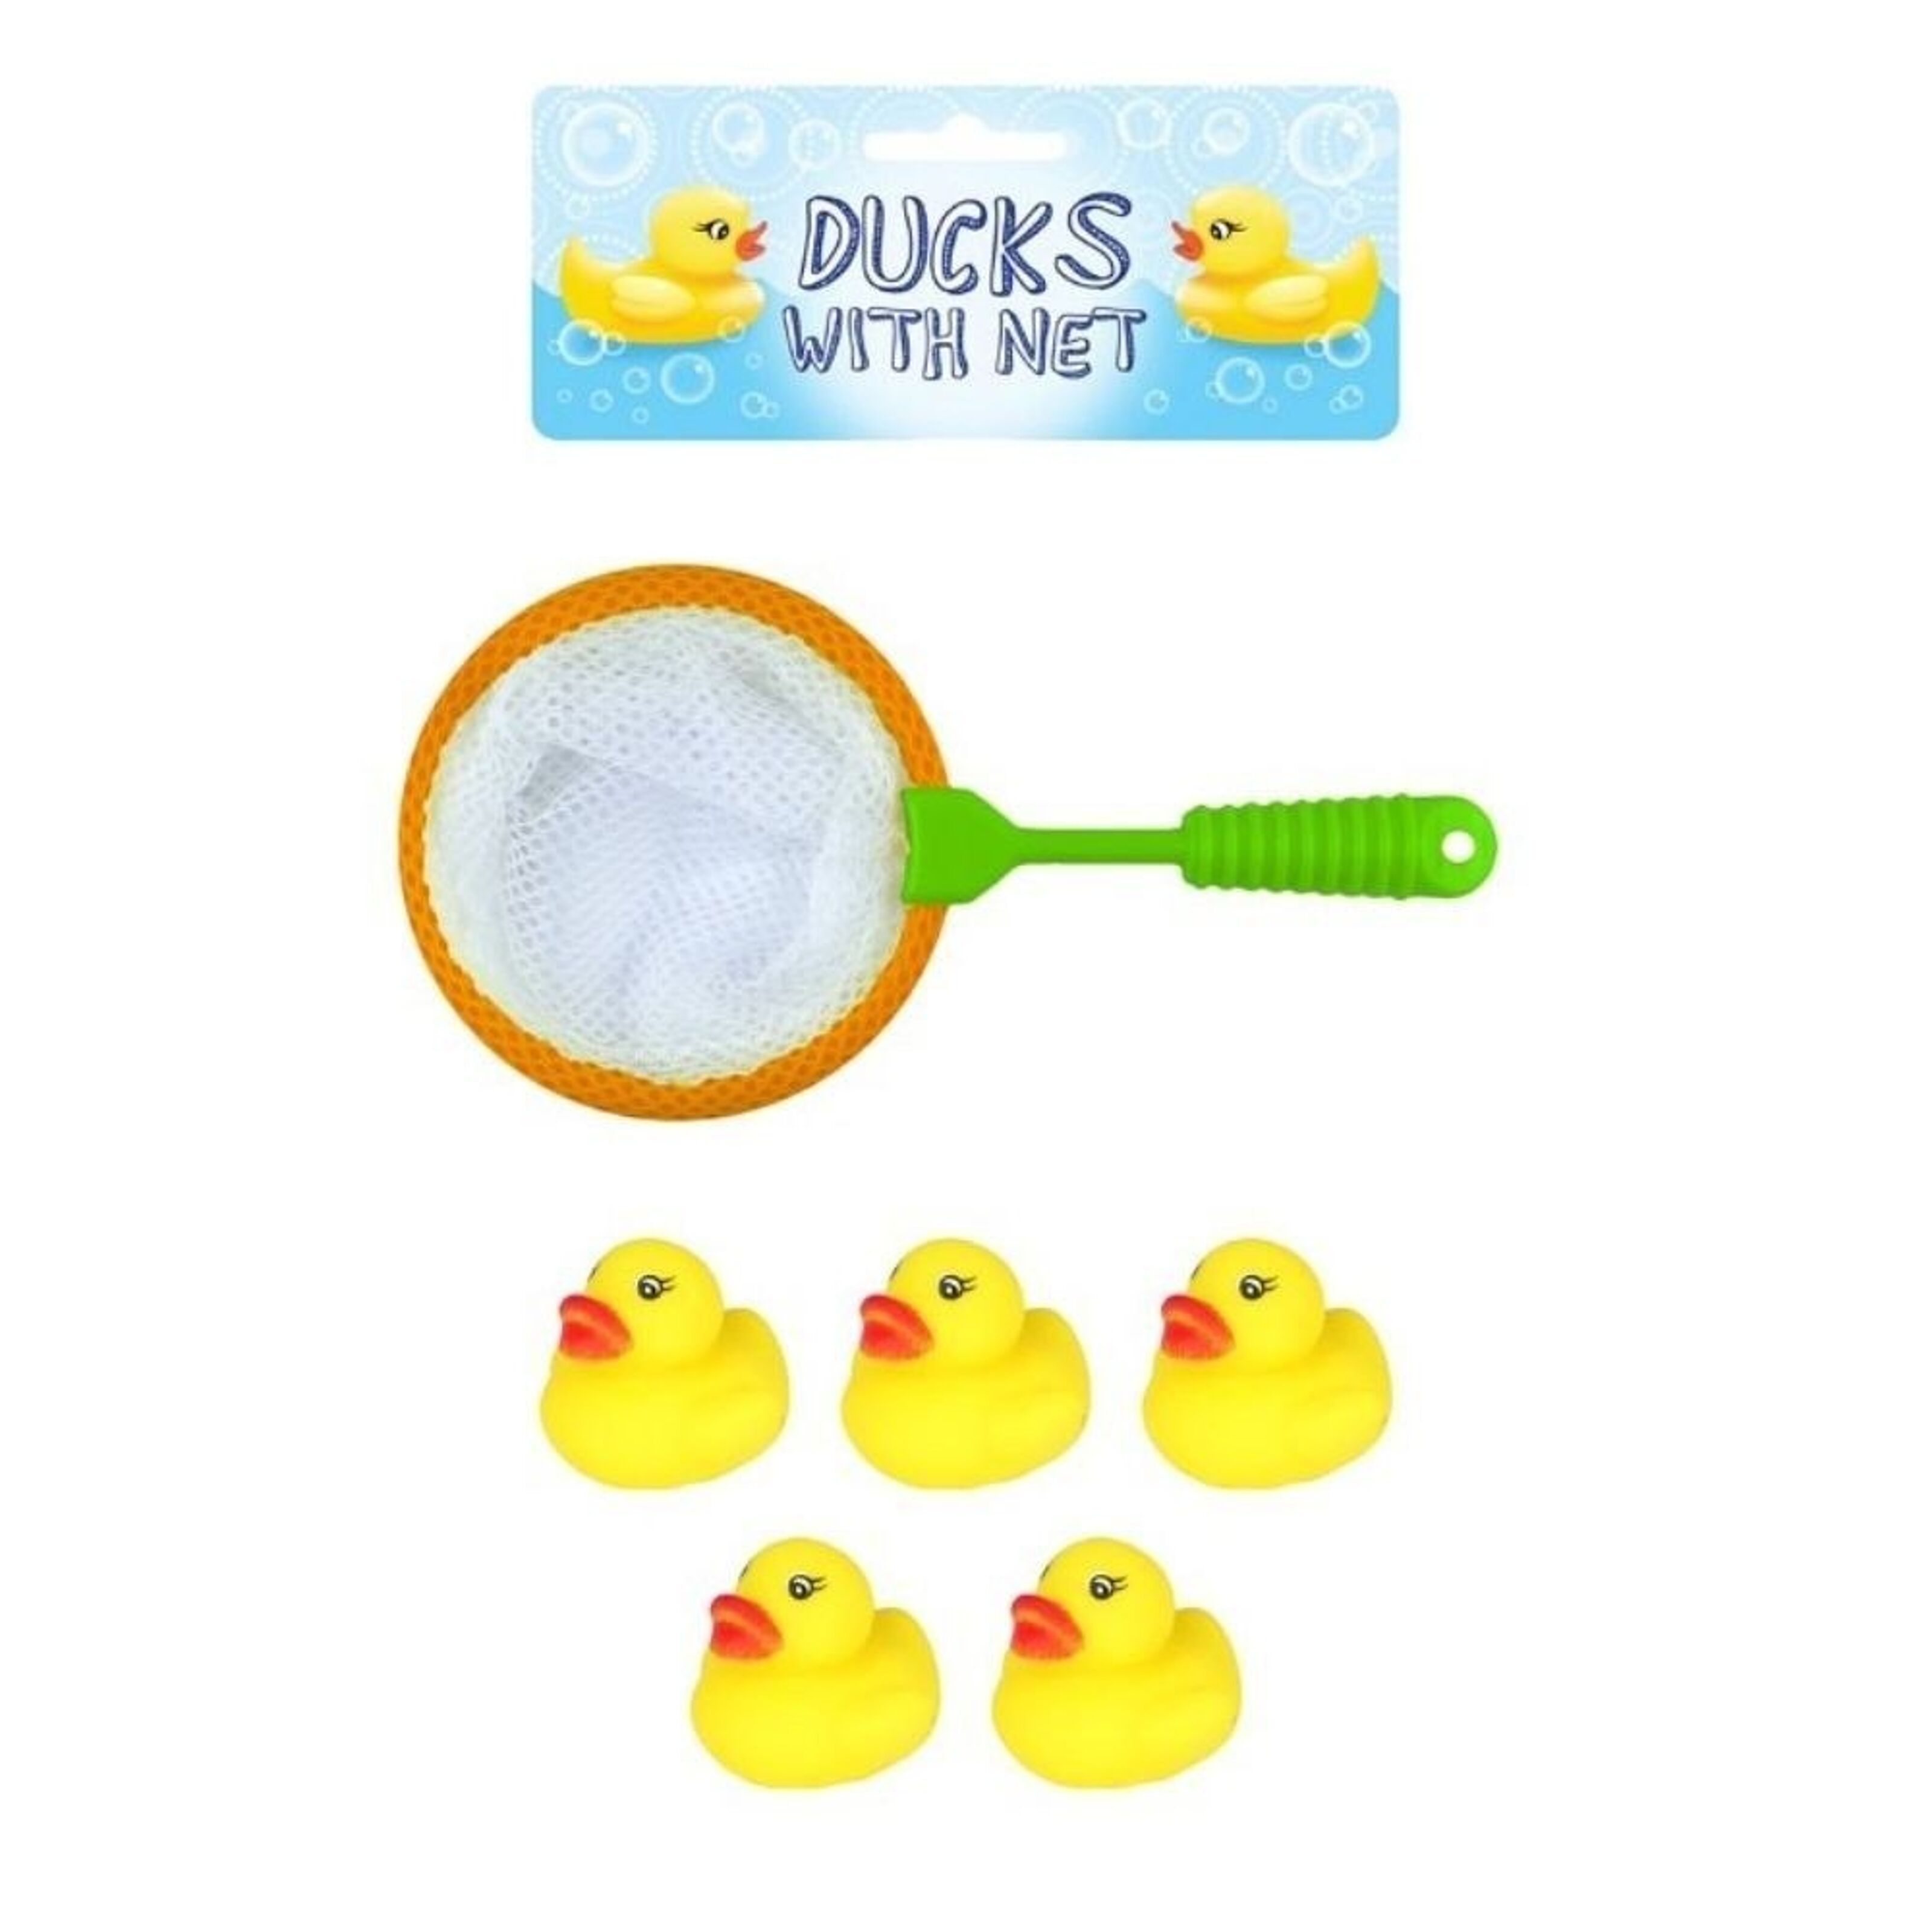 Buy wholesale Duck fishing with net (5 pieces + net)